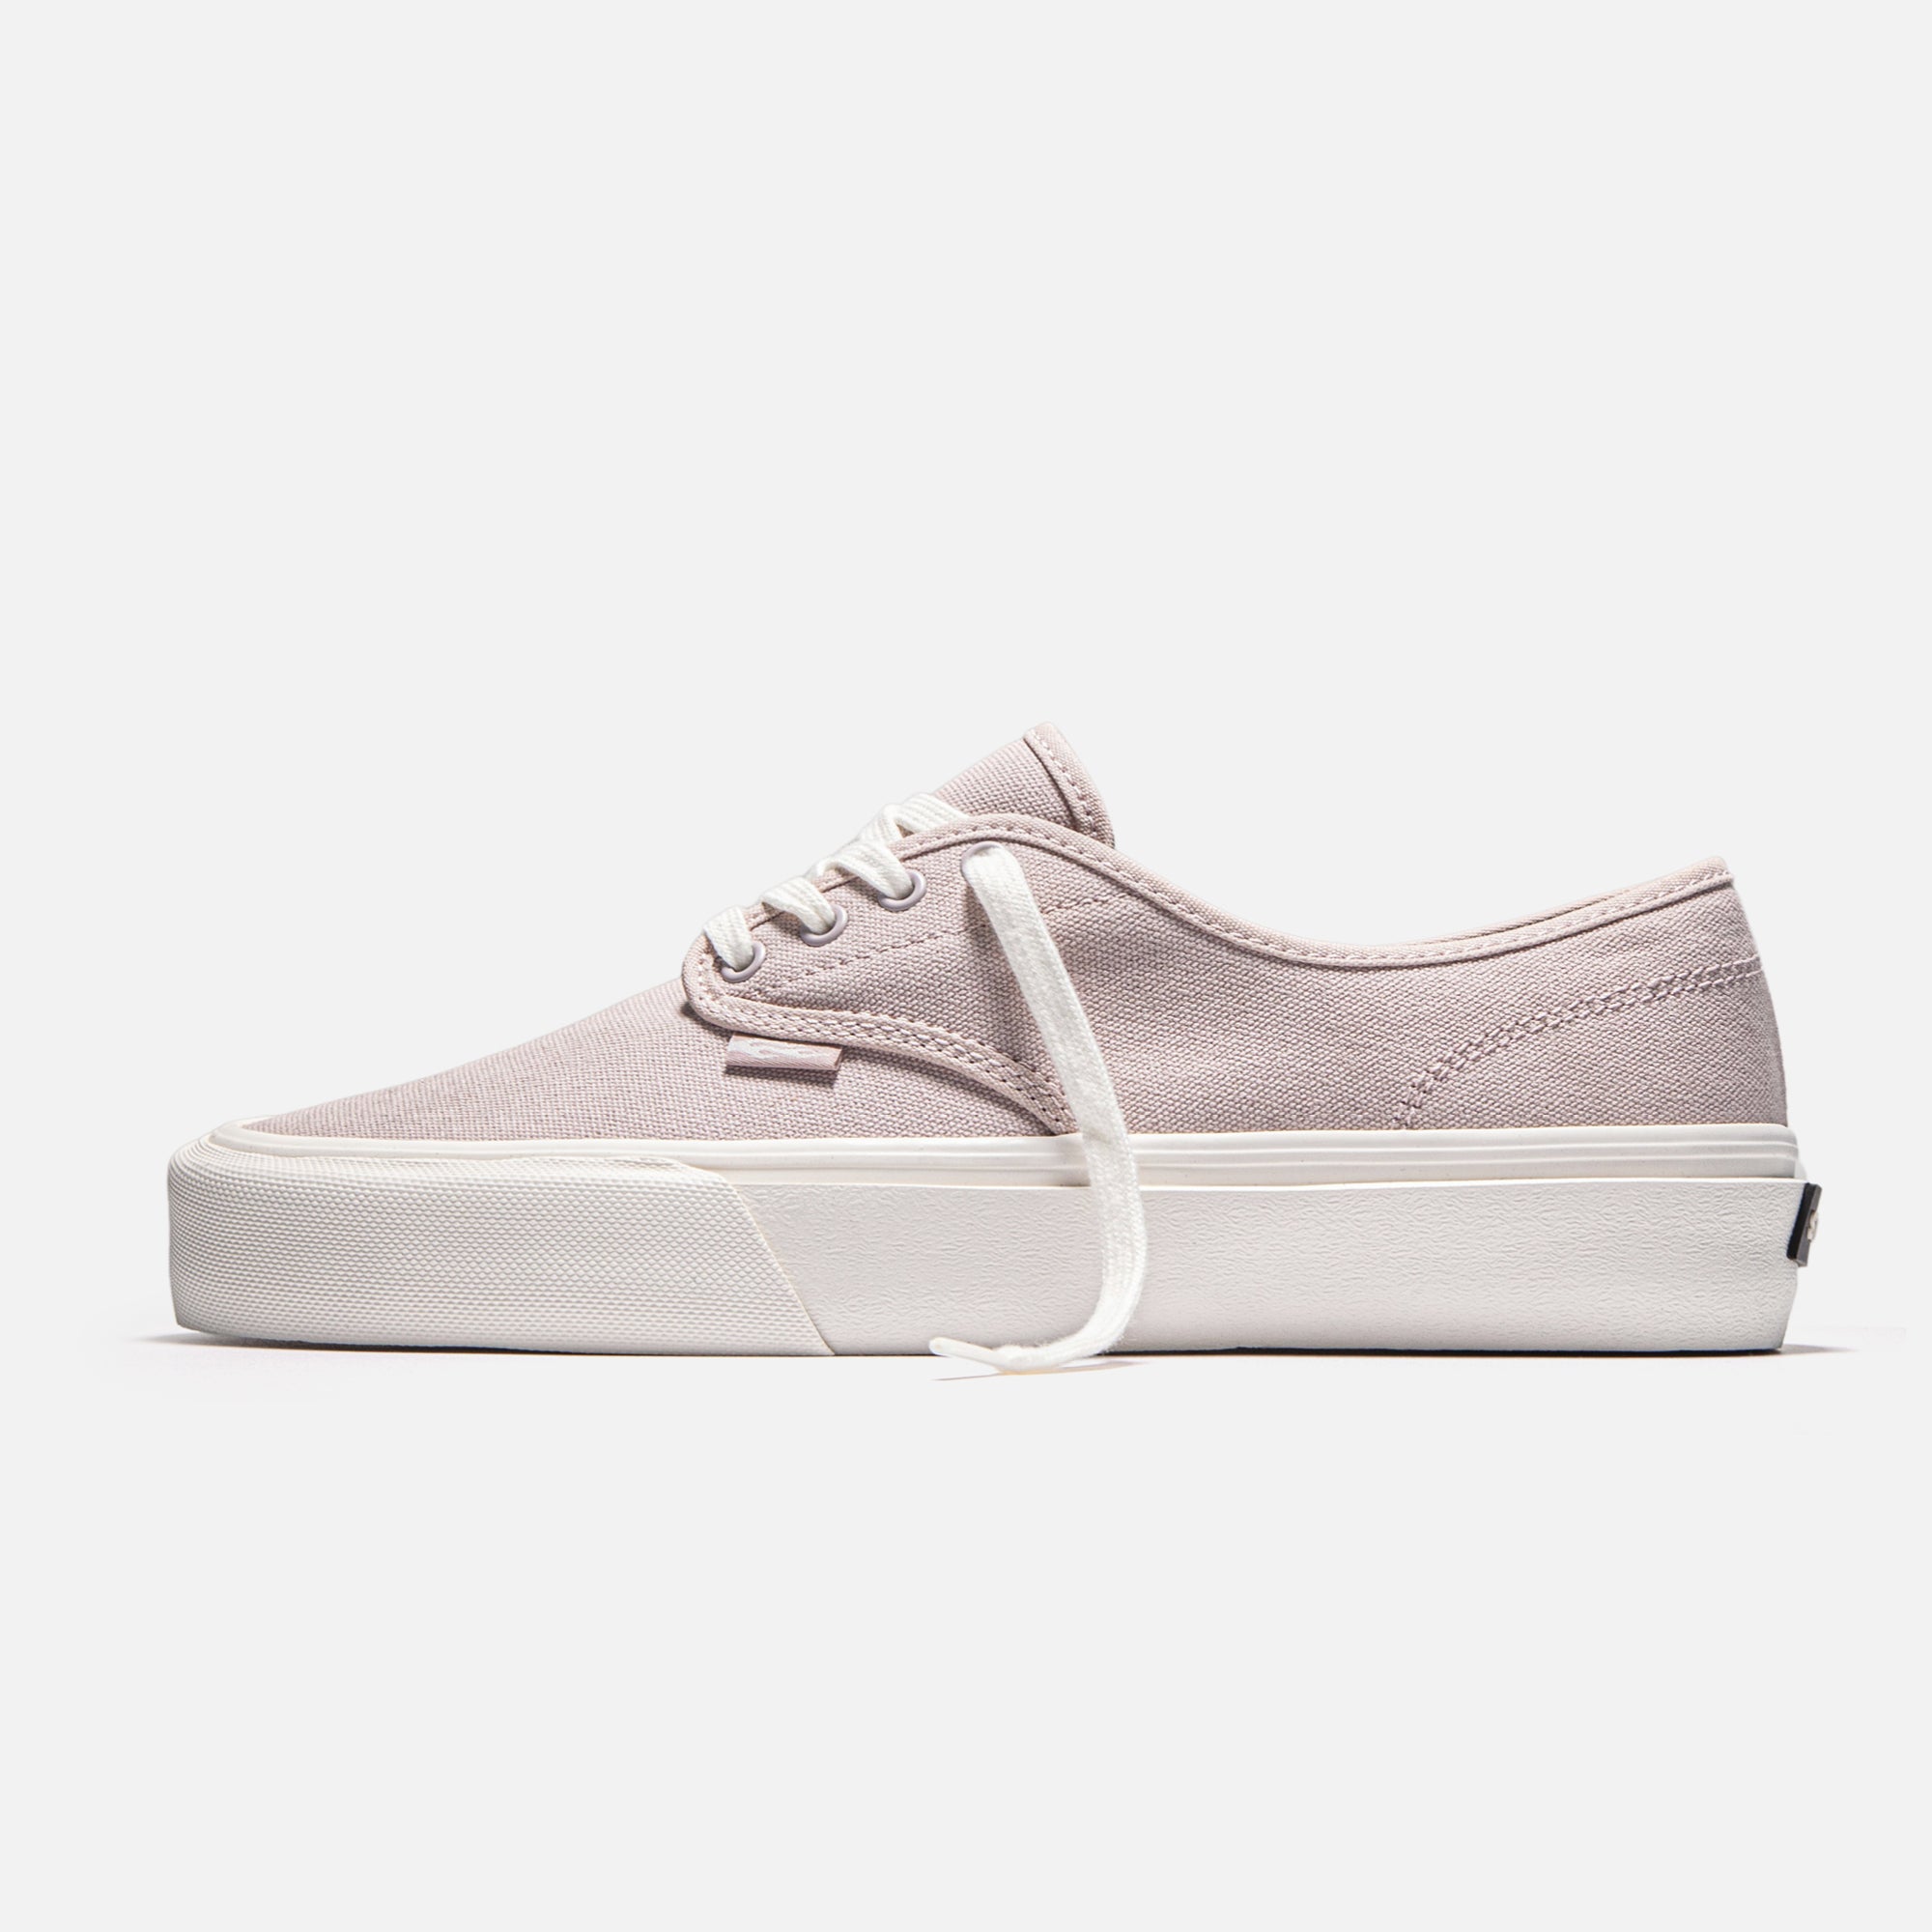 GOWER - DUSTY PINK | SIDE VIEW